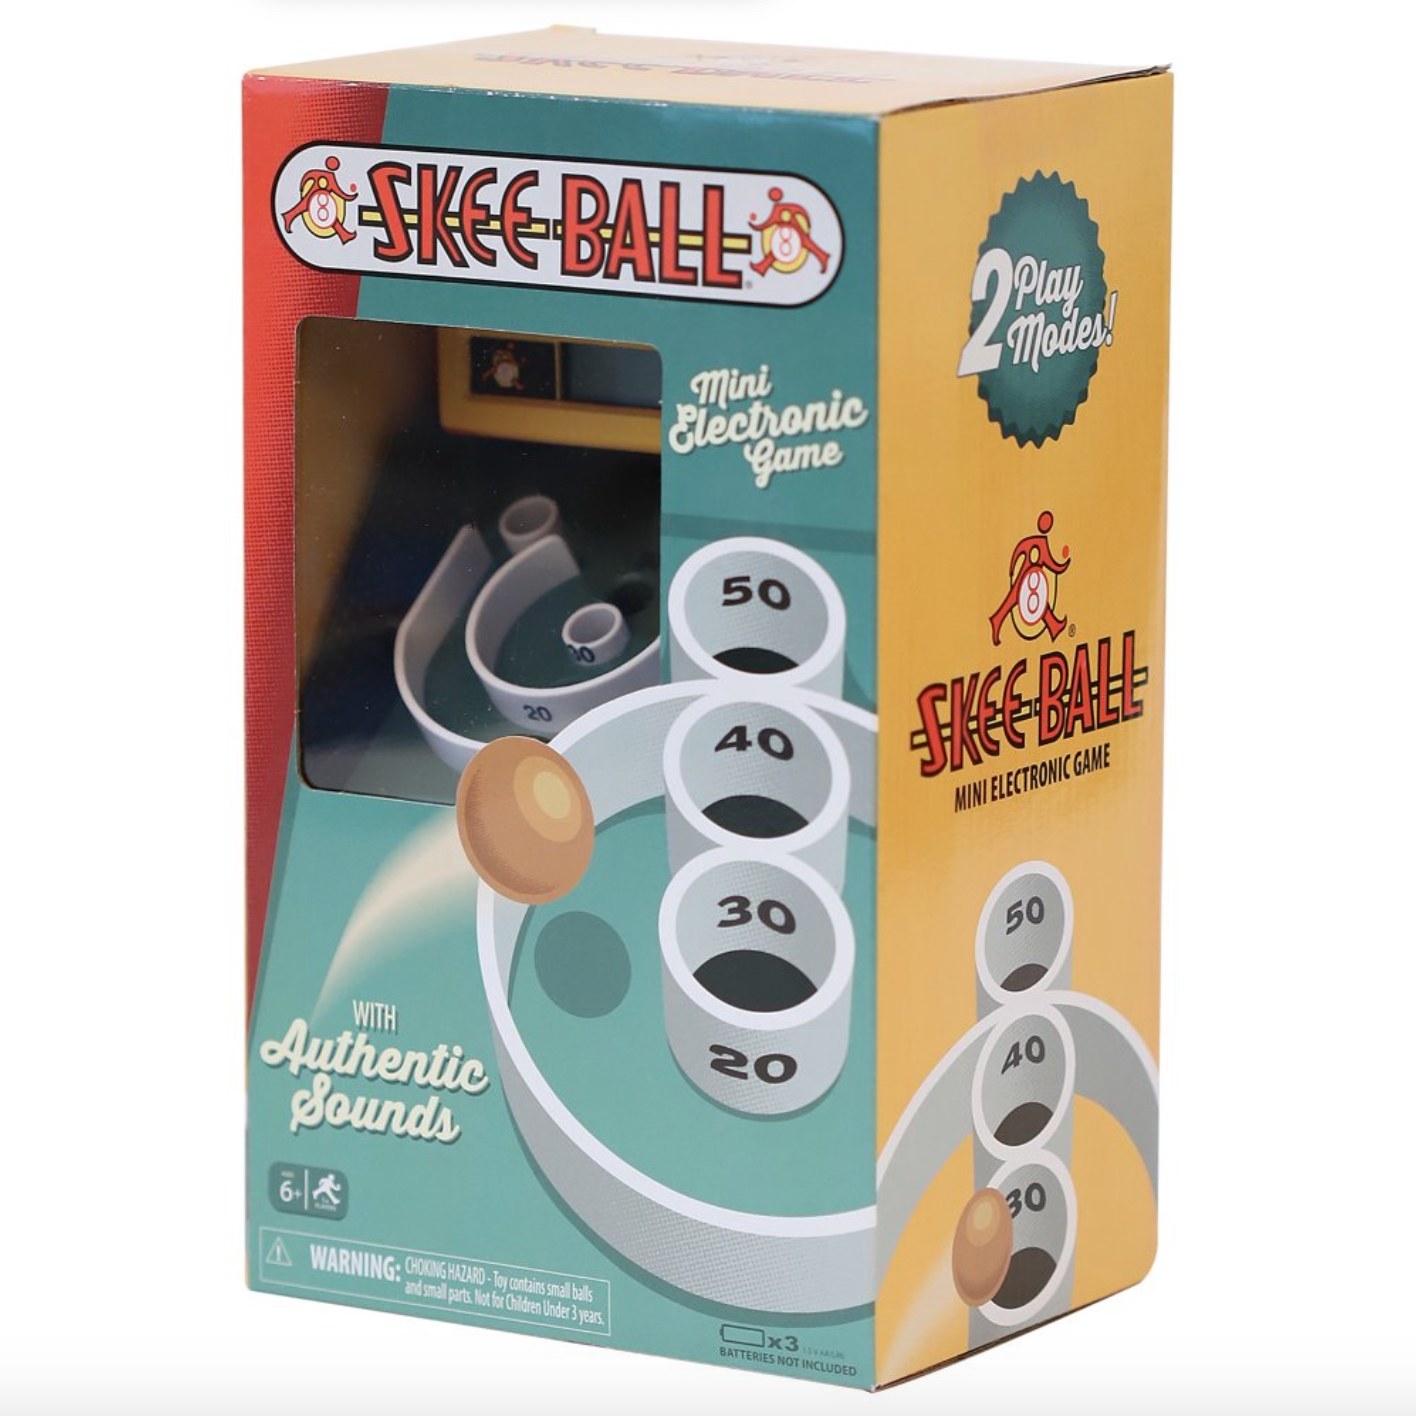 The retro game of skee ball in a green and yellow package